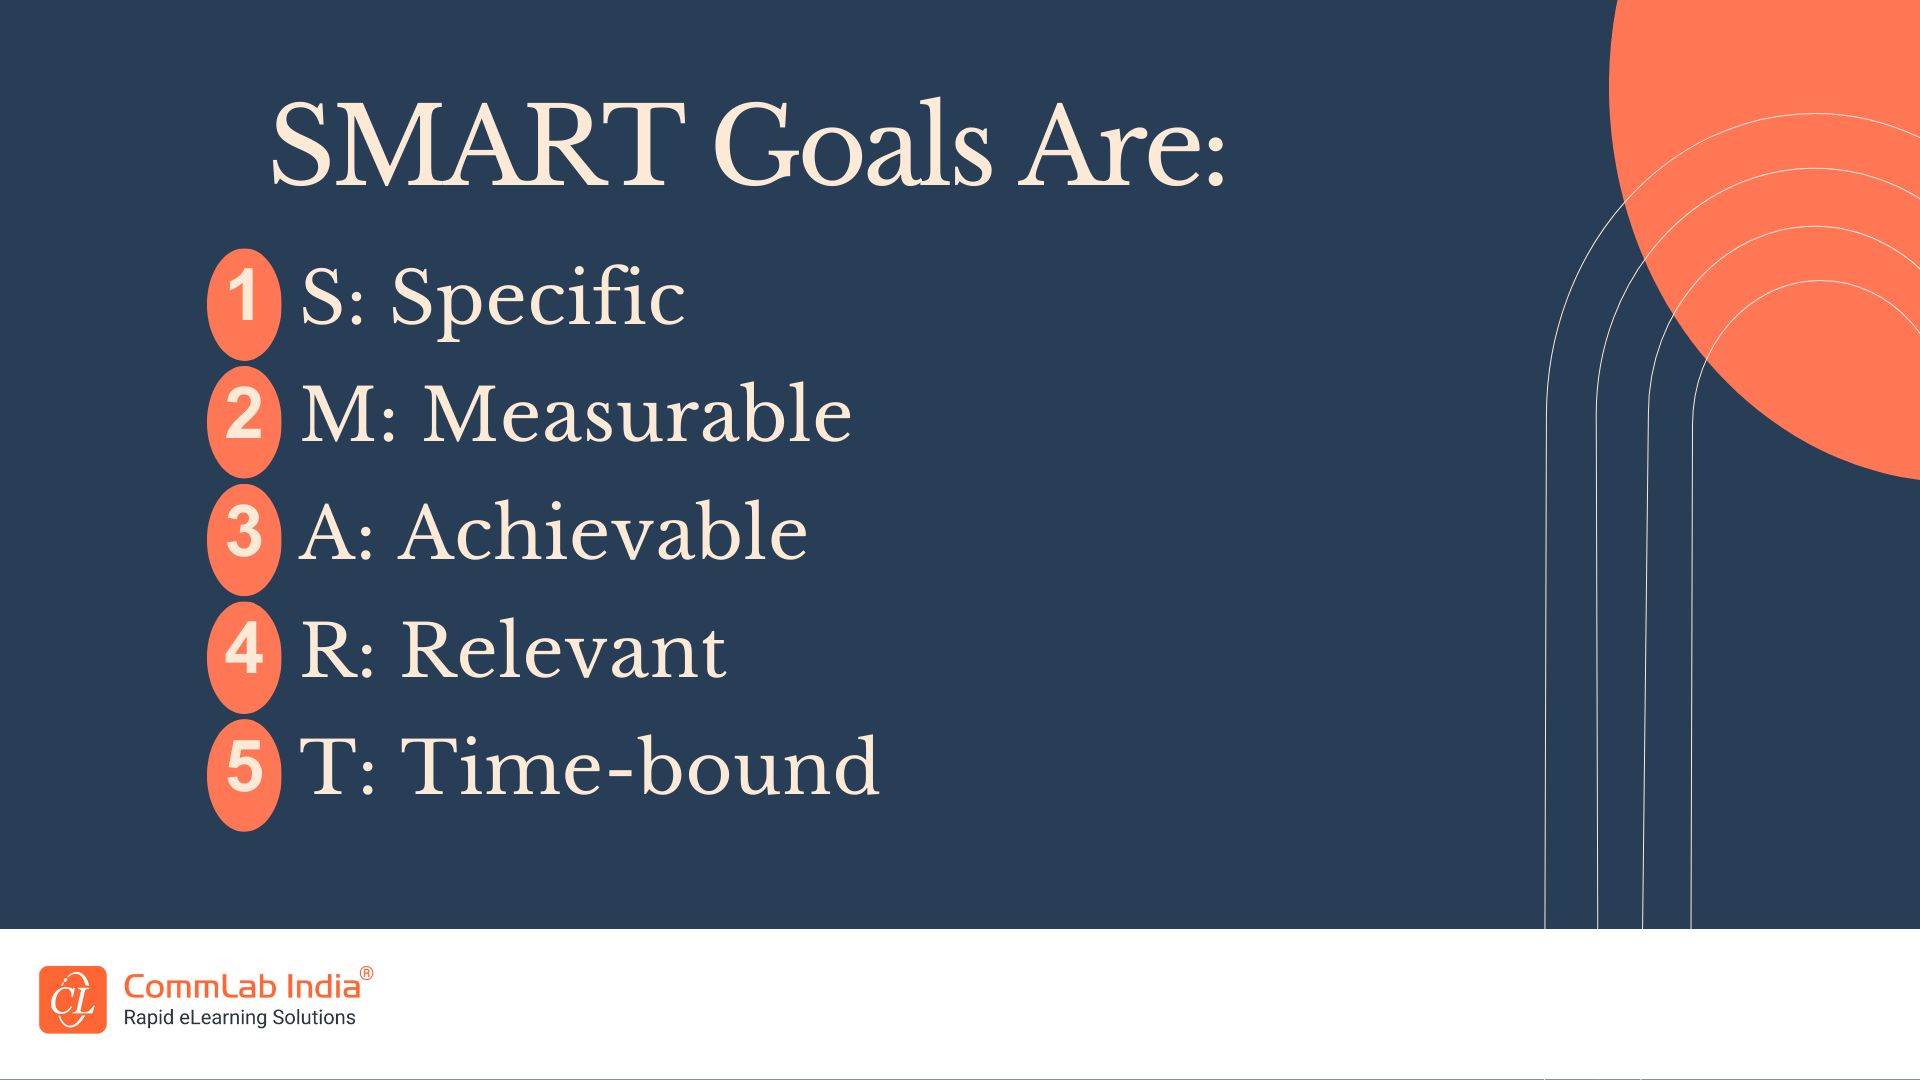 What Are the SMART Goals for Custom eLearning Program?